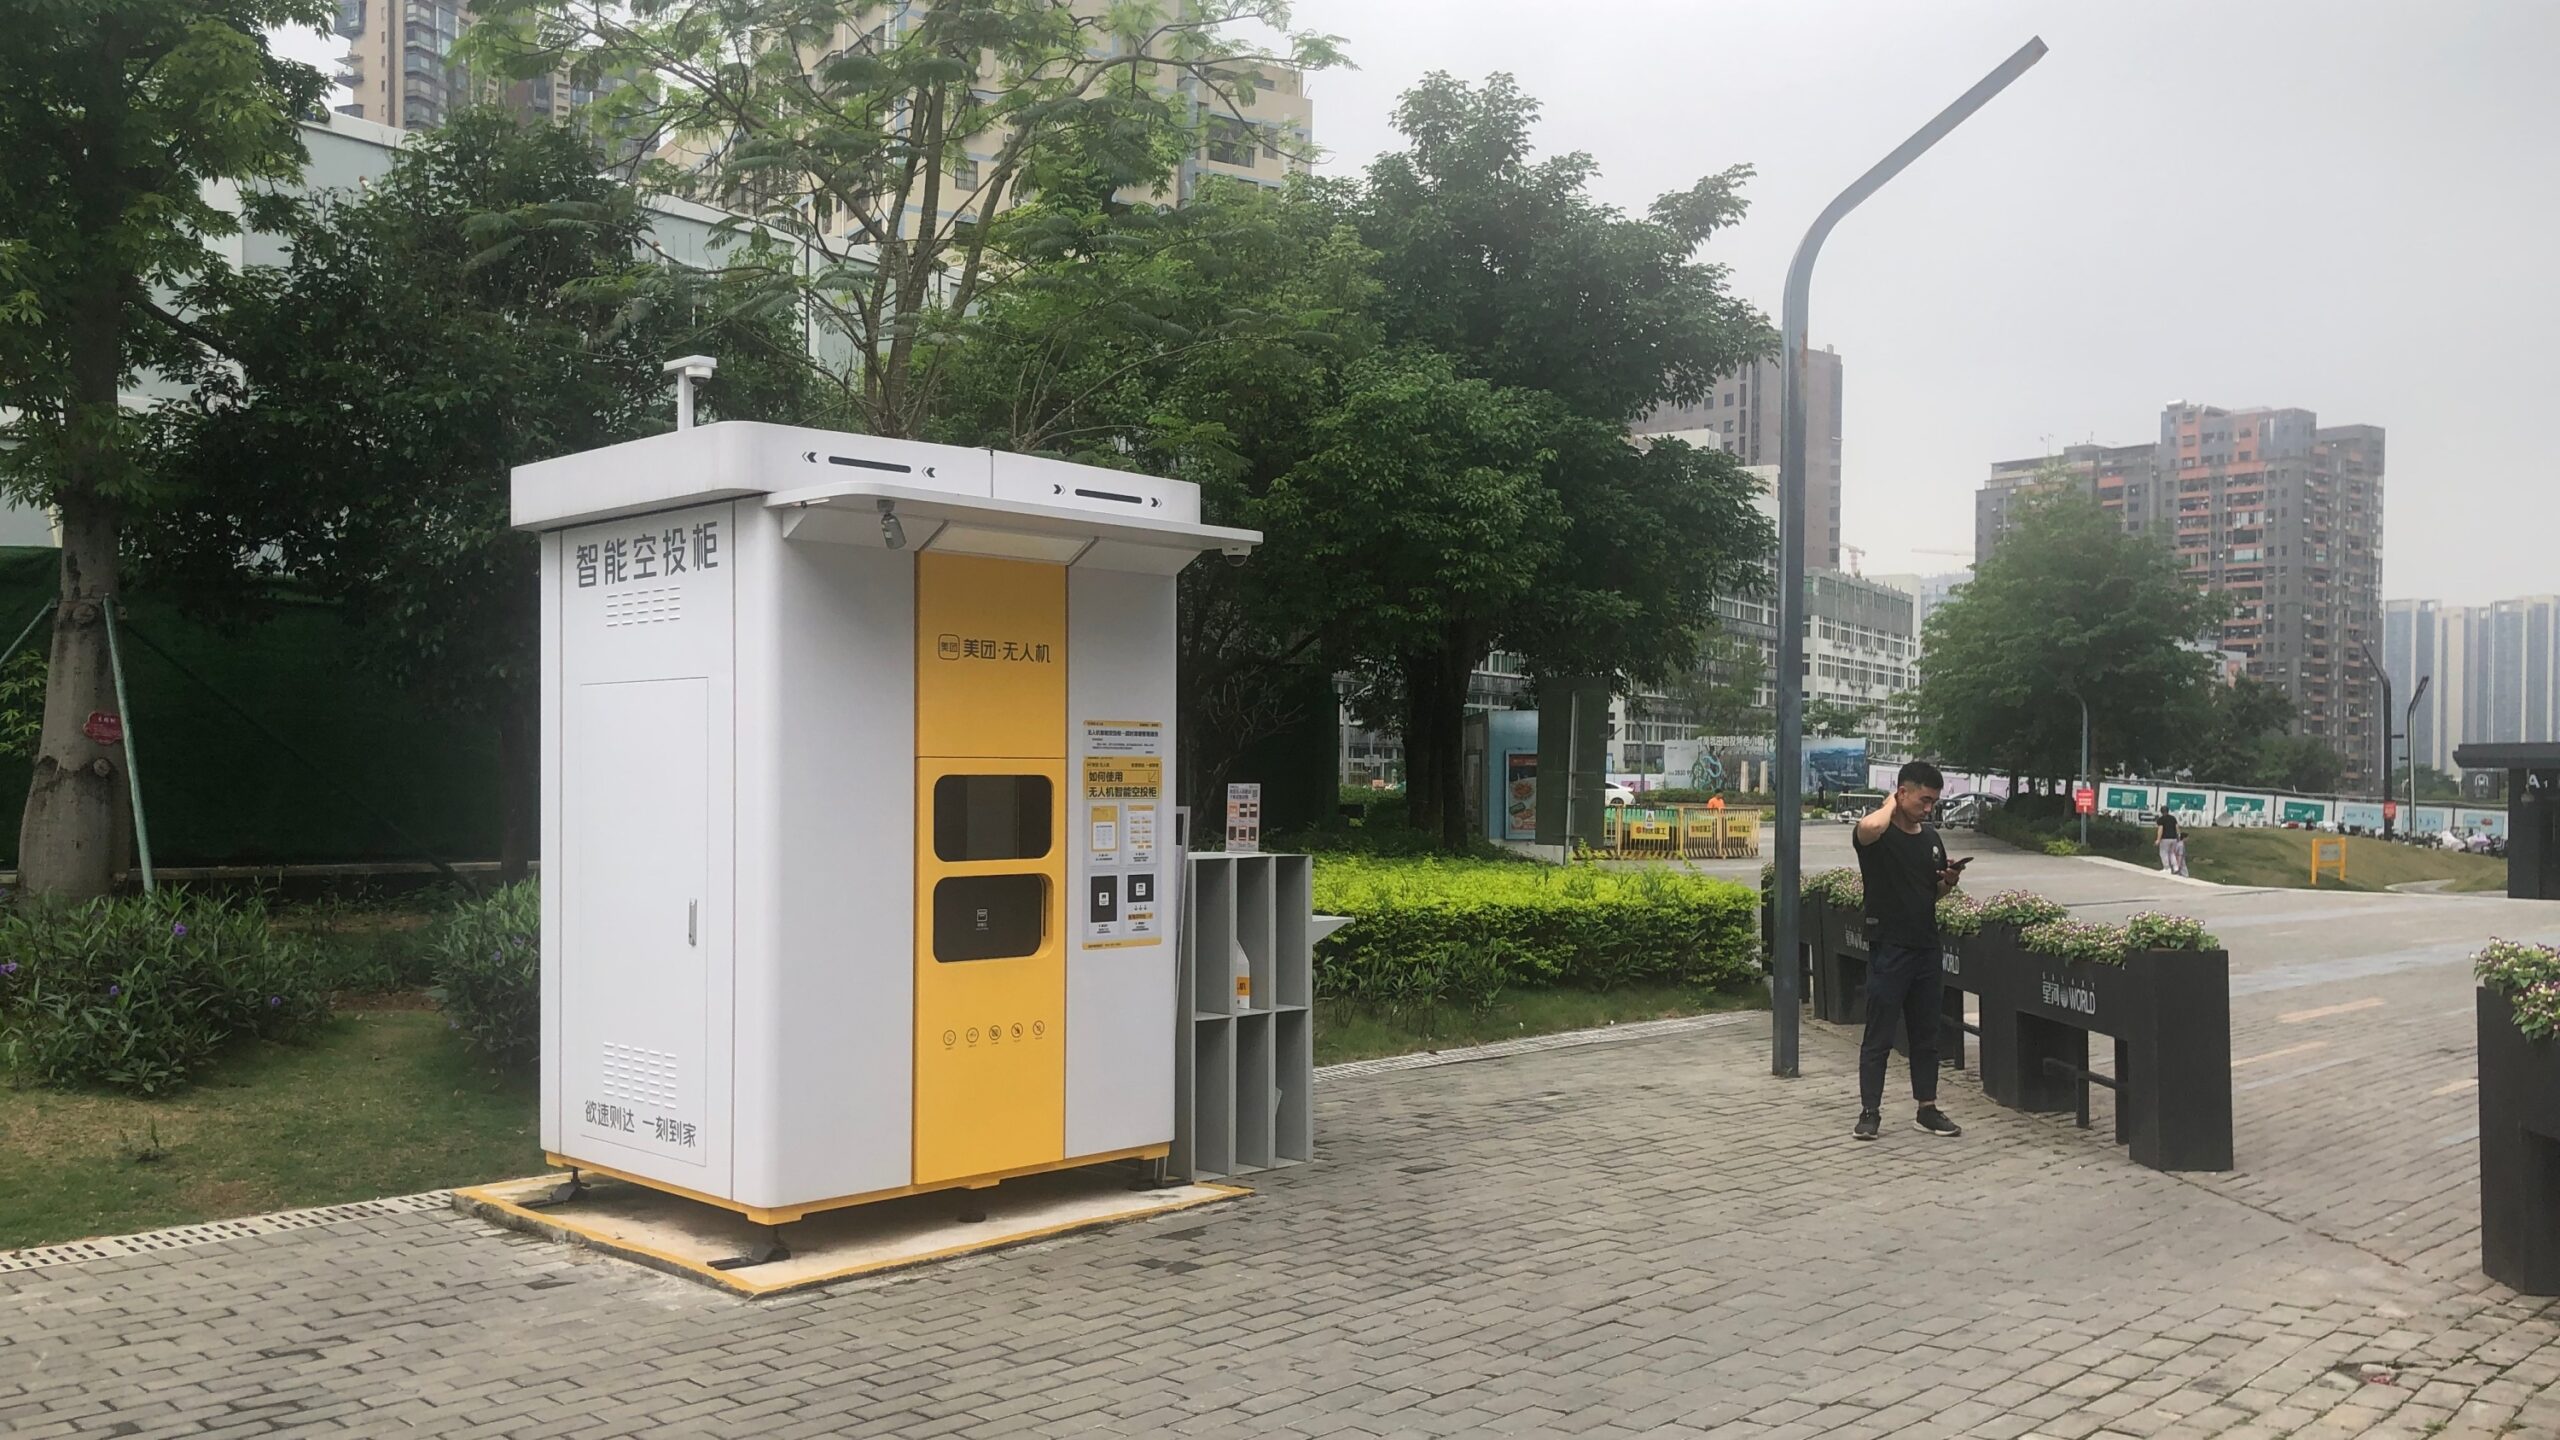 A yellow-and-white Meituan pickup kiosk in front of trees. A man is standing nearby.